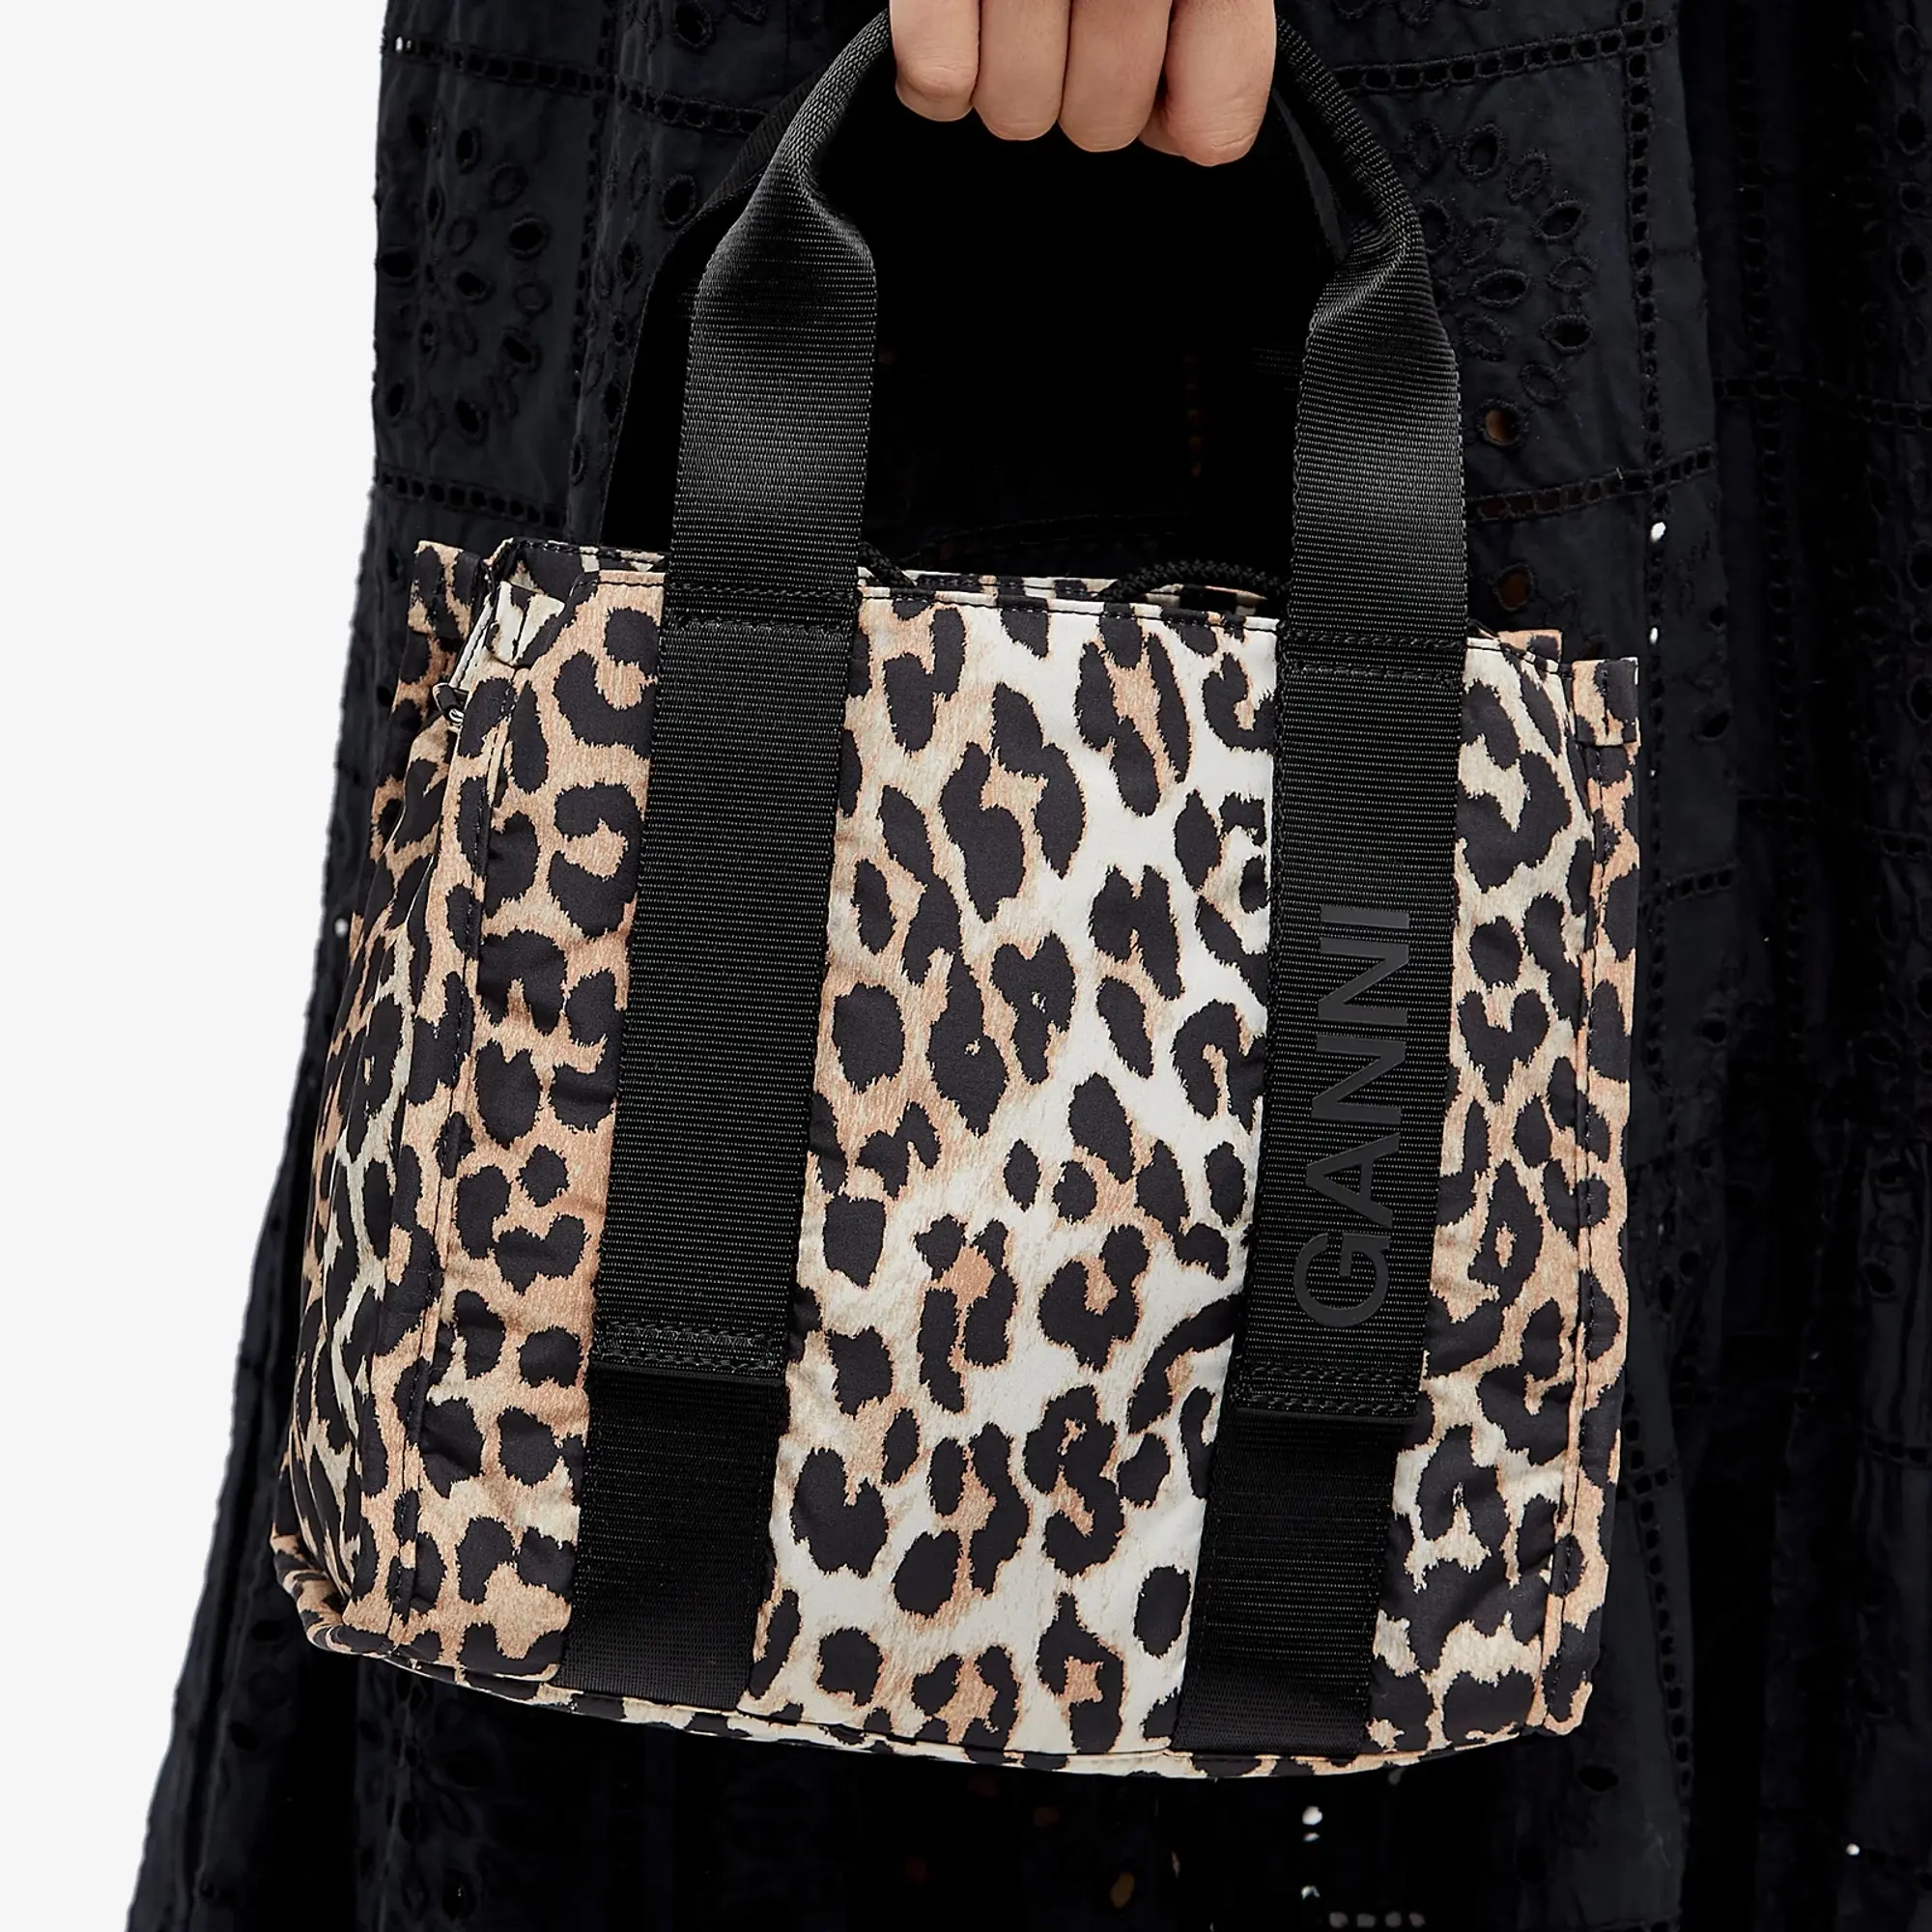 GANNI Women's Recycled Tech Small Tote Print Leopard